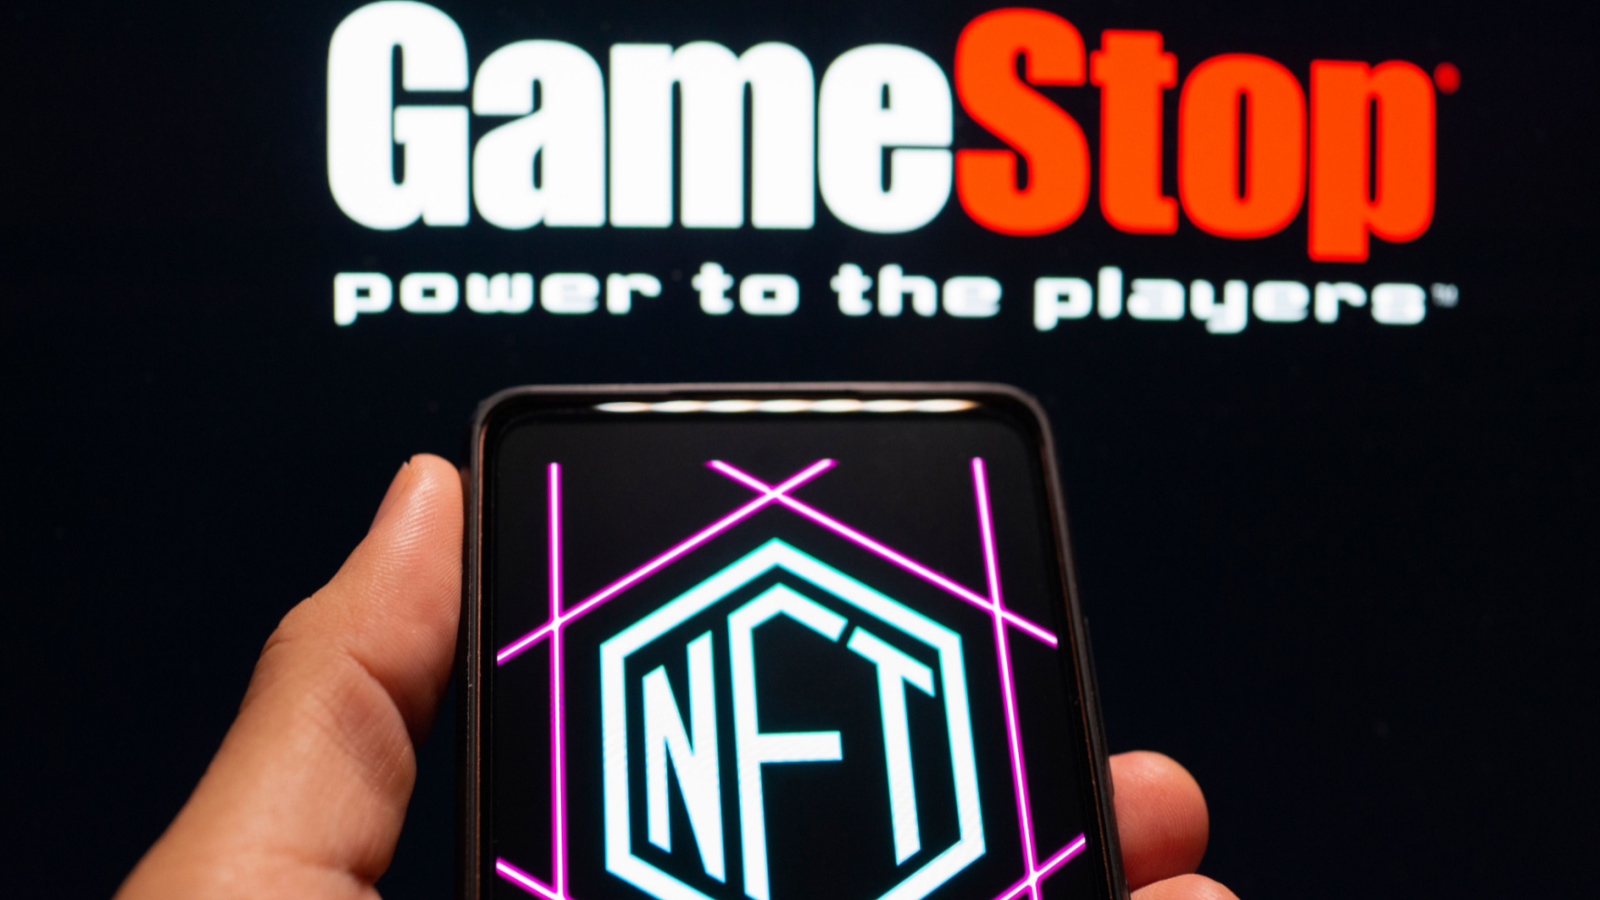 The GameStop (GME Stock) logo above the NFT logo on a smartphone.